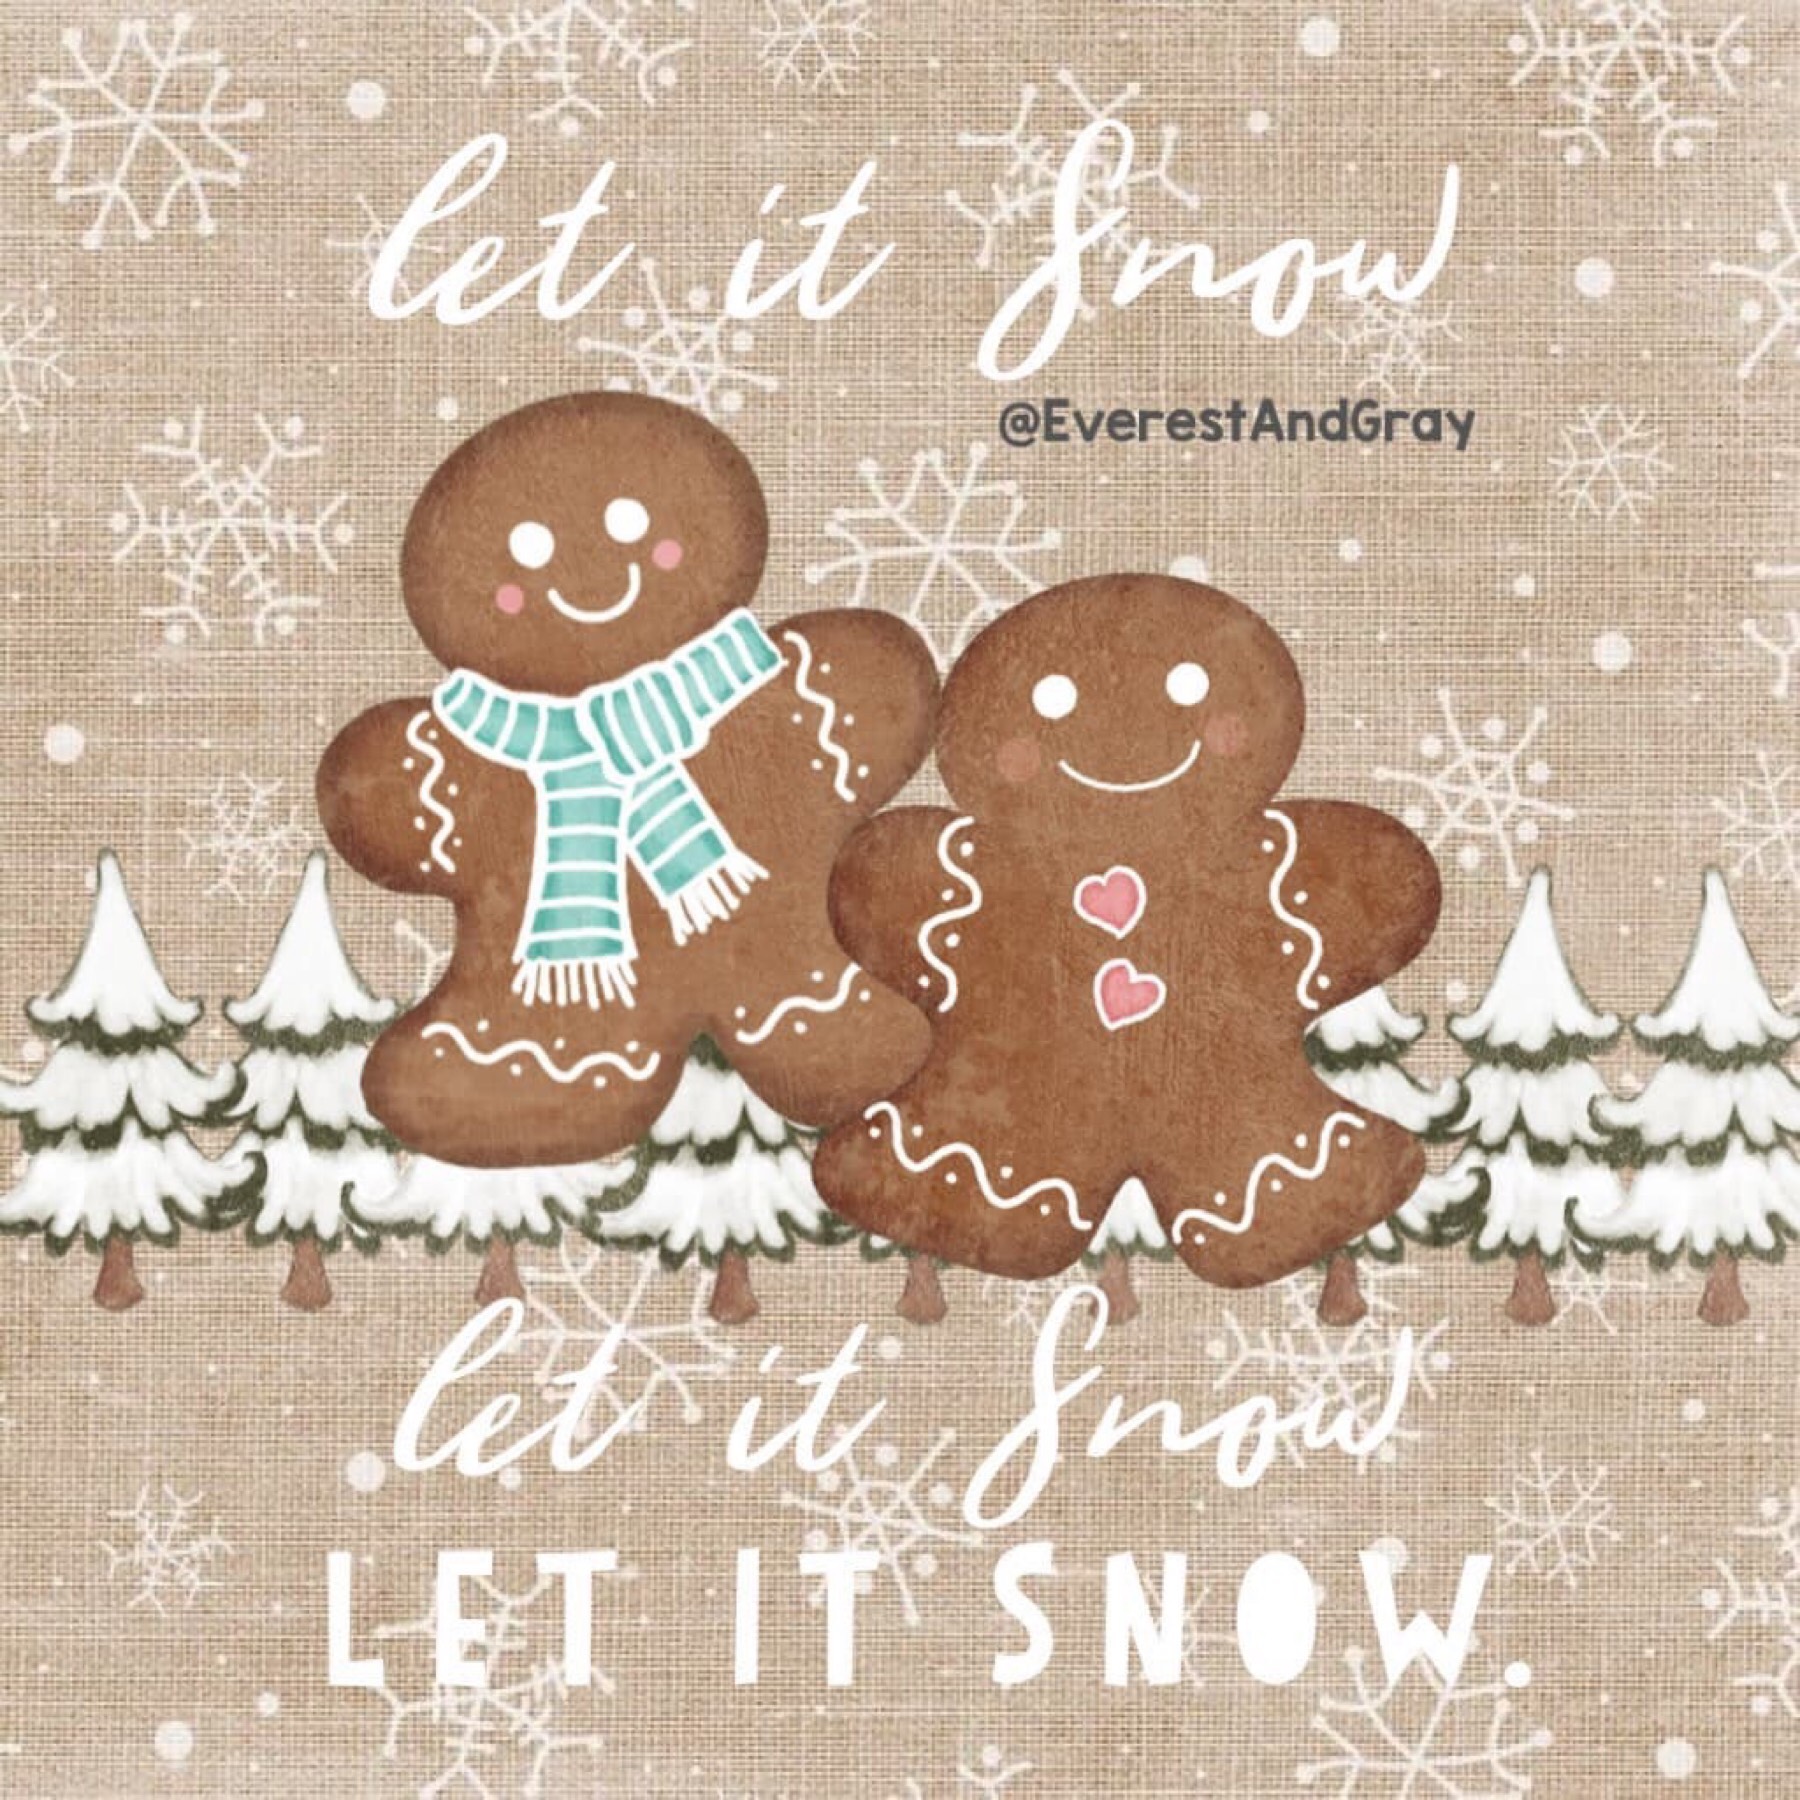 ☃️Let it Snow!❄️ Everyone enjoying winter break? 🛷🌲 
You can get my sticker pack #HollyJollyChristmas in the sticker shop + enjoy! ♥️😘 #Christmas #winter #snow @piccollage